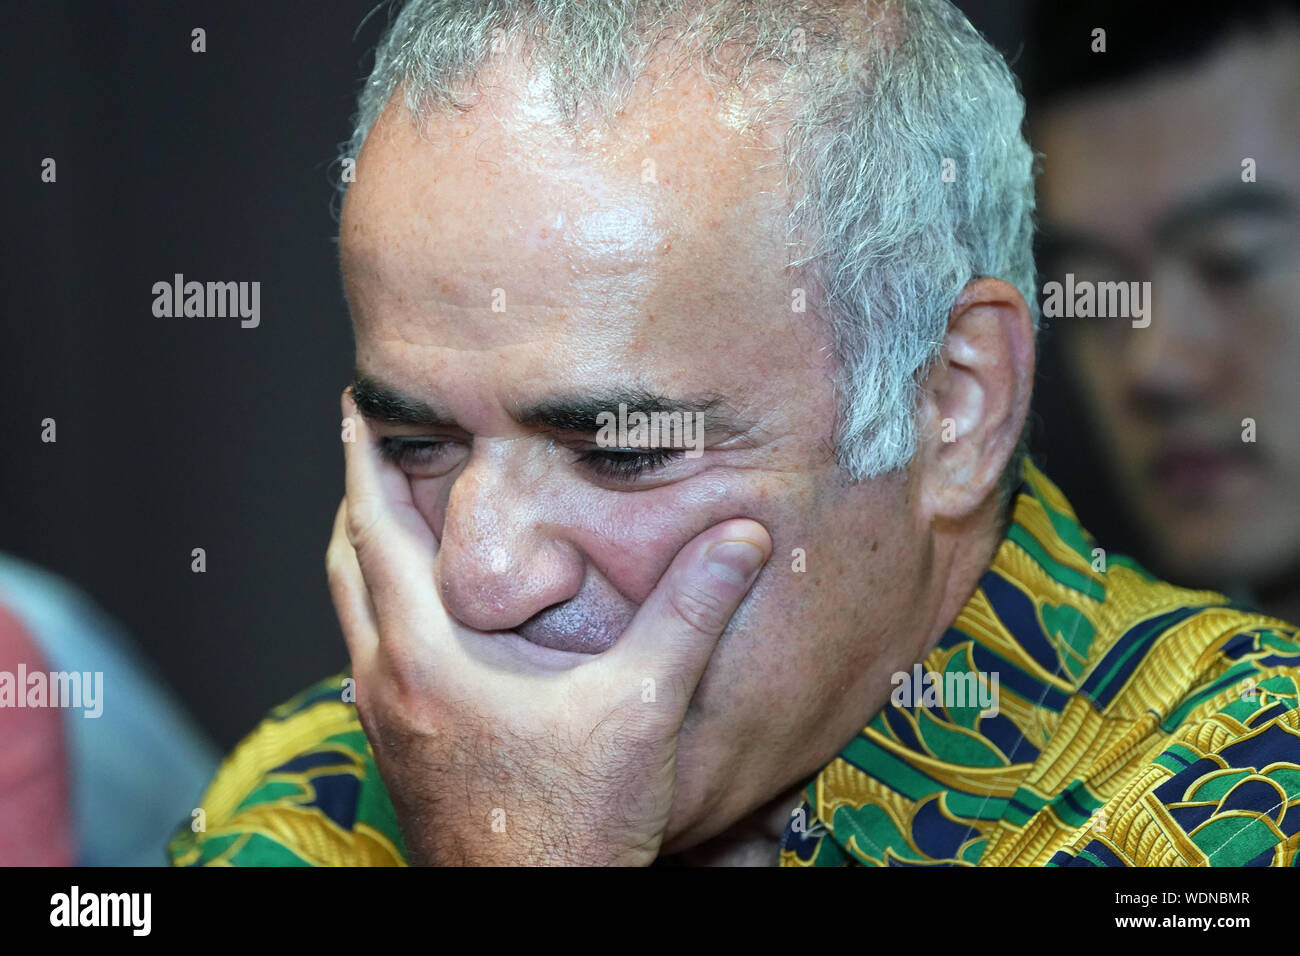 St. Louis, United States. 29th Aug, 2019. Chess Grand Master, Garry Kasparov watches the first round of exhibition team play for those that participated in the Sinquefield Cup Tournament at the Saint Louis Chess Club in St. Louis on Thursday, August 29, 2019. Kasparov, the former world chess champion, is considered to be the greatest chess player of all time. Photo by Bill Greenblatt/UPI Credit: UPI/Alamy Live News Stock Photo